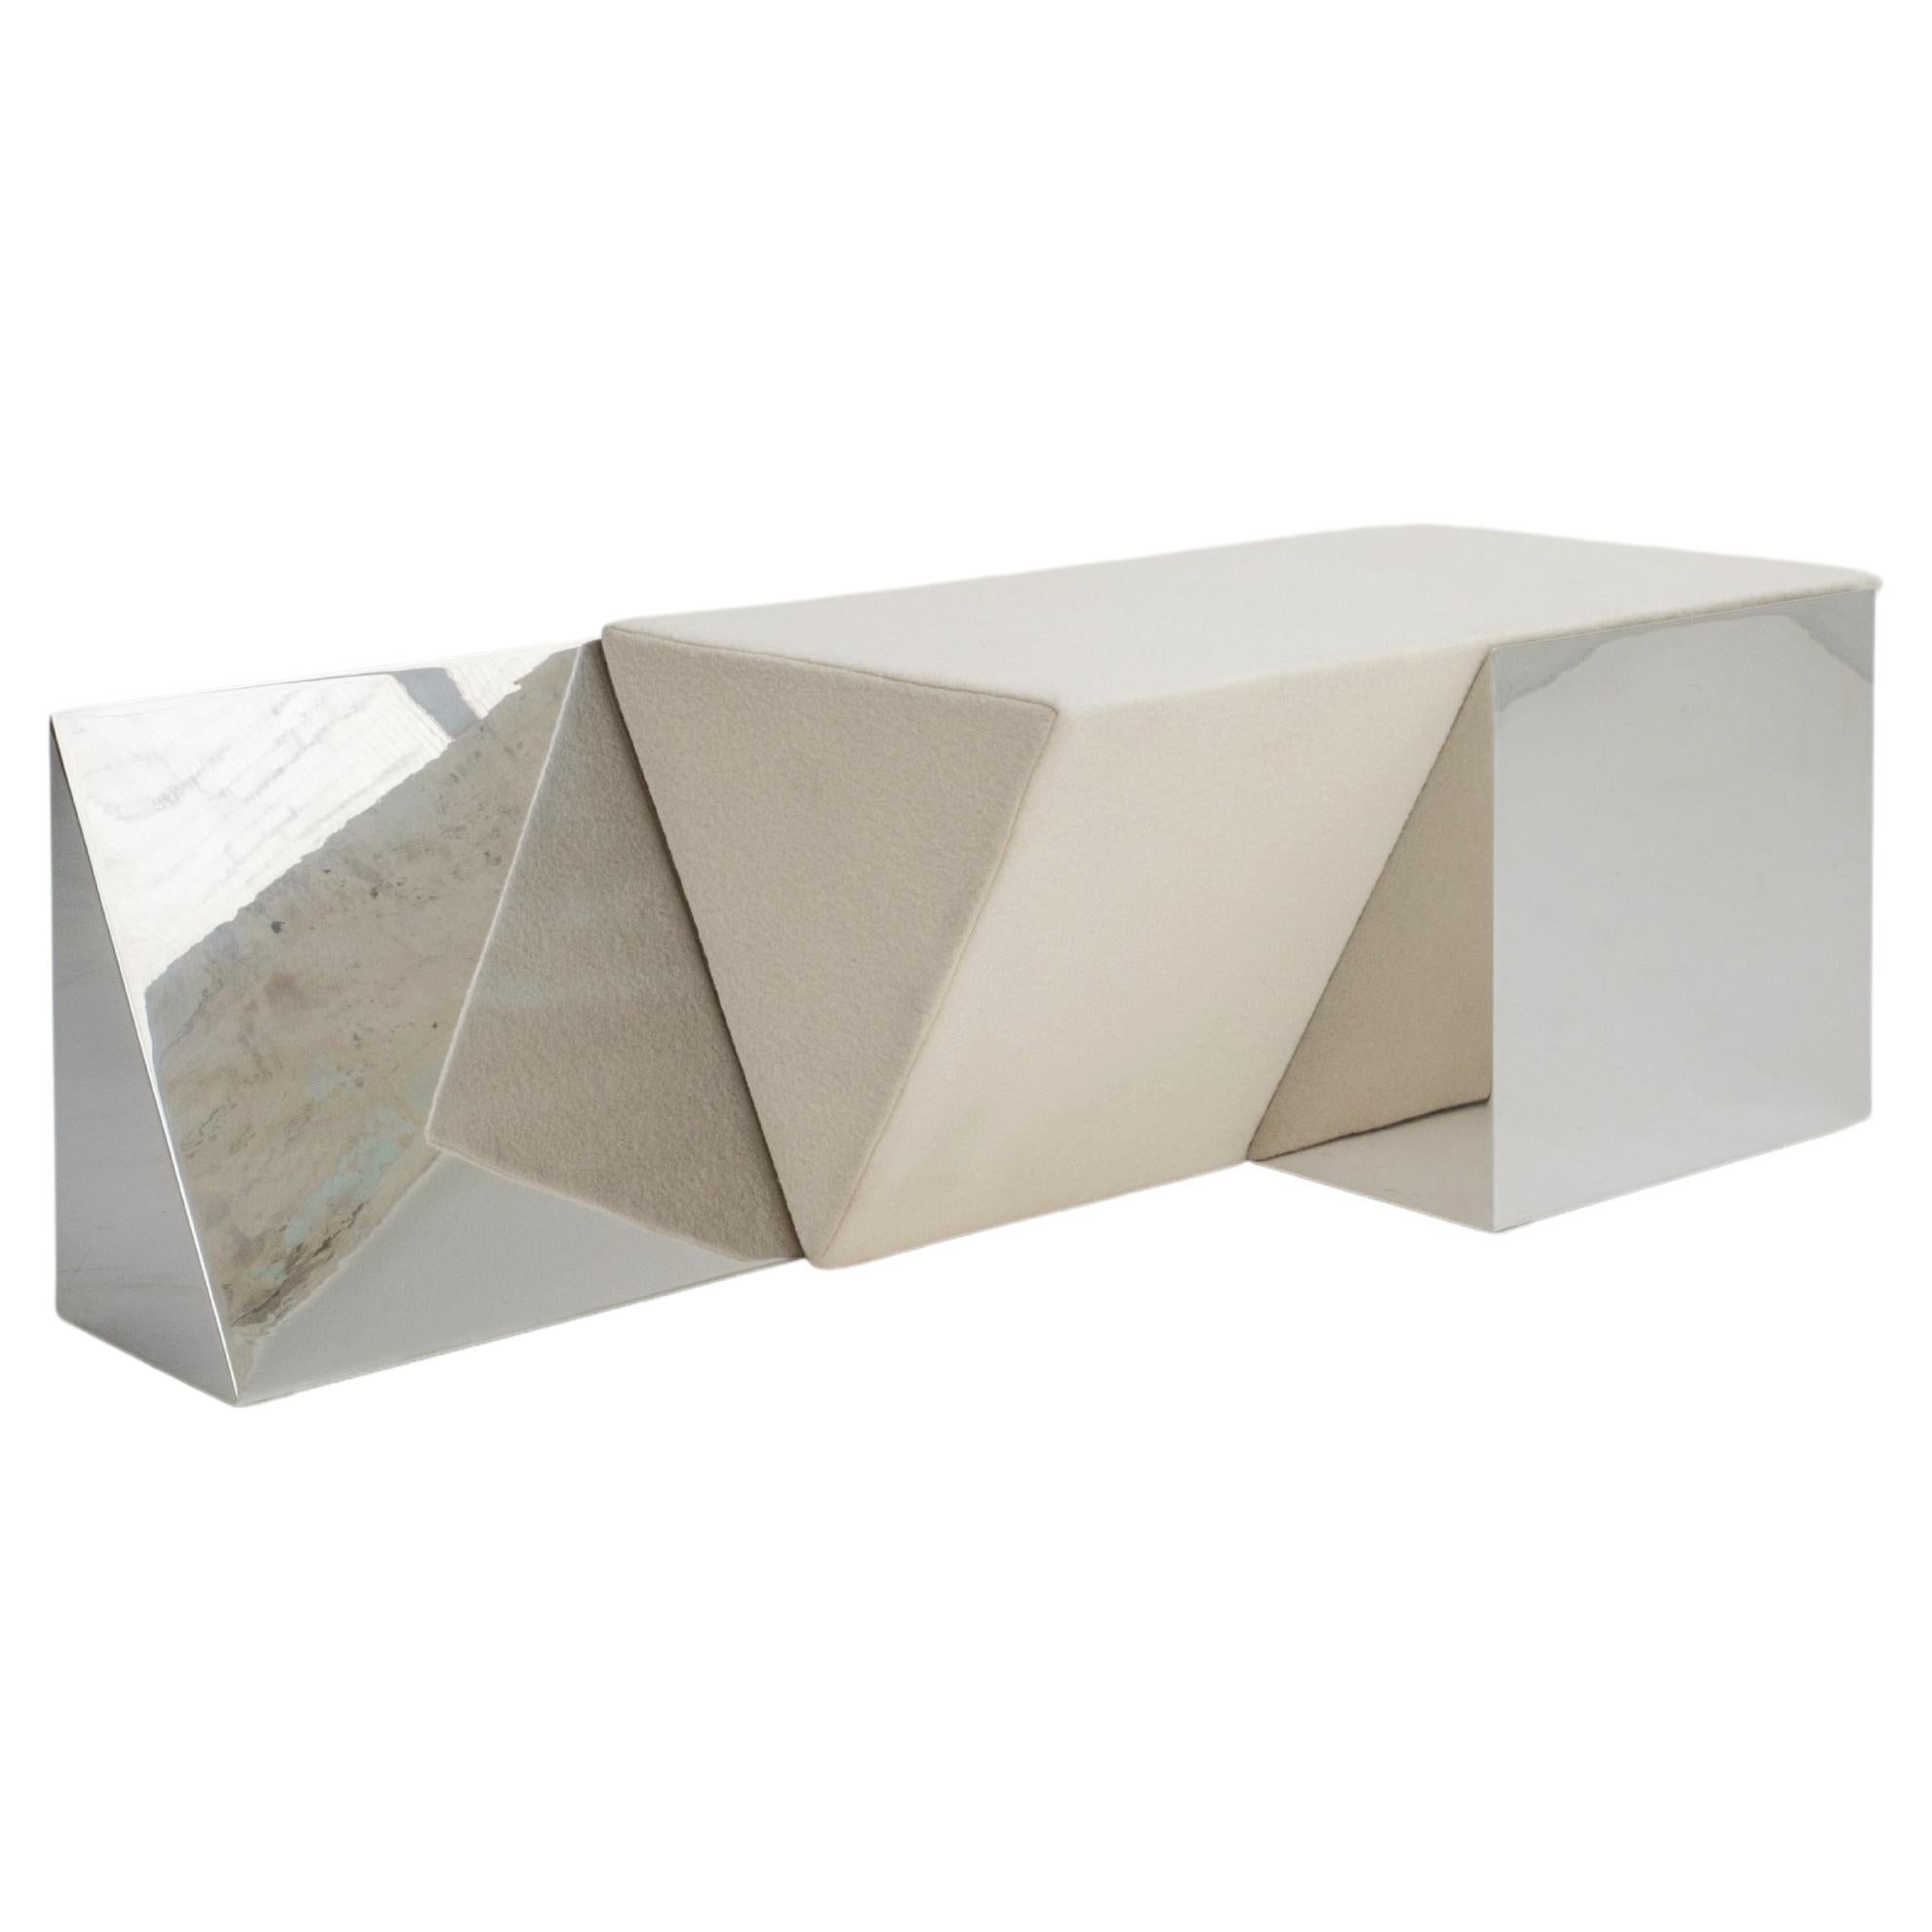 Miljevina Bench Large in Mirror-Polished Stainless Steel and Upholstery